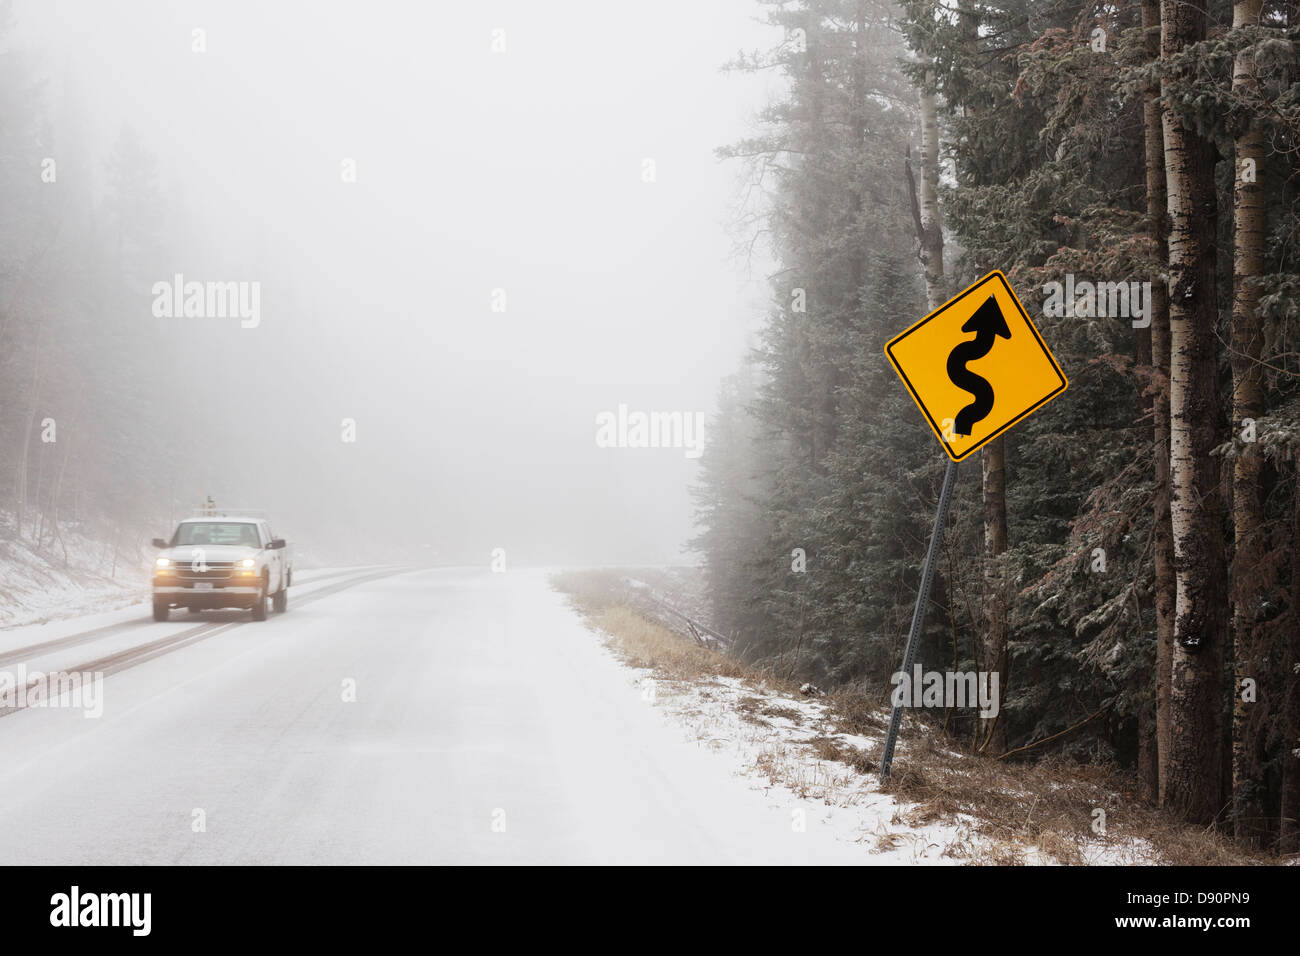 A truck and a curve sign in fog and snow on a mountain road. Stock Photo